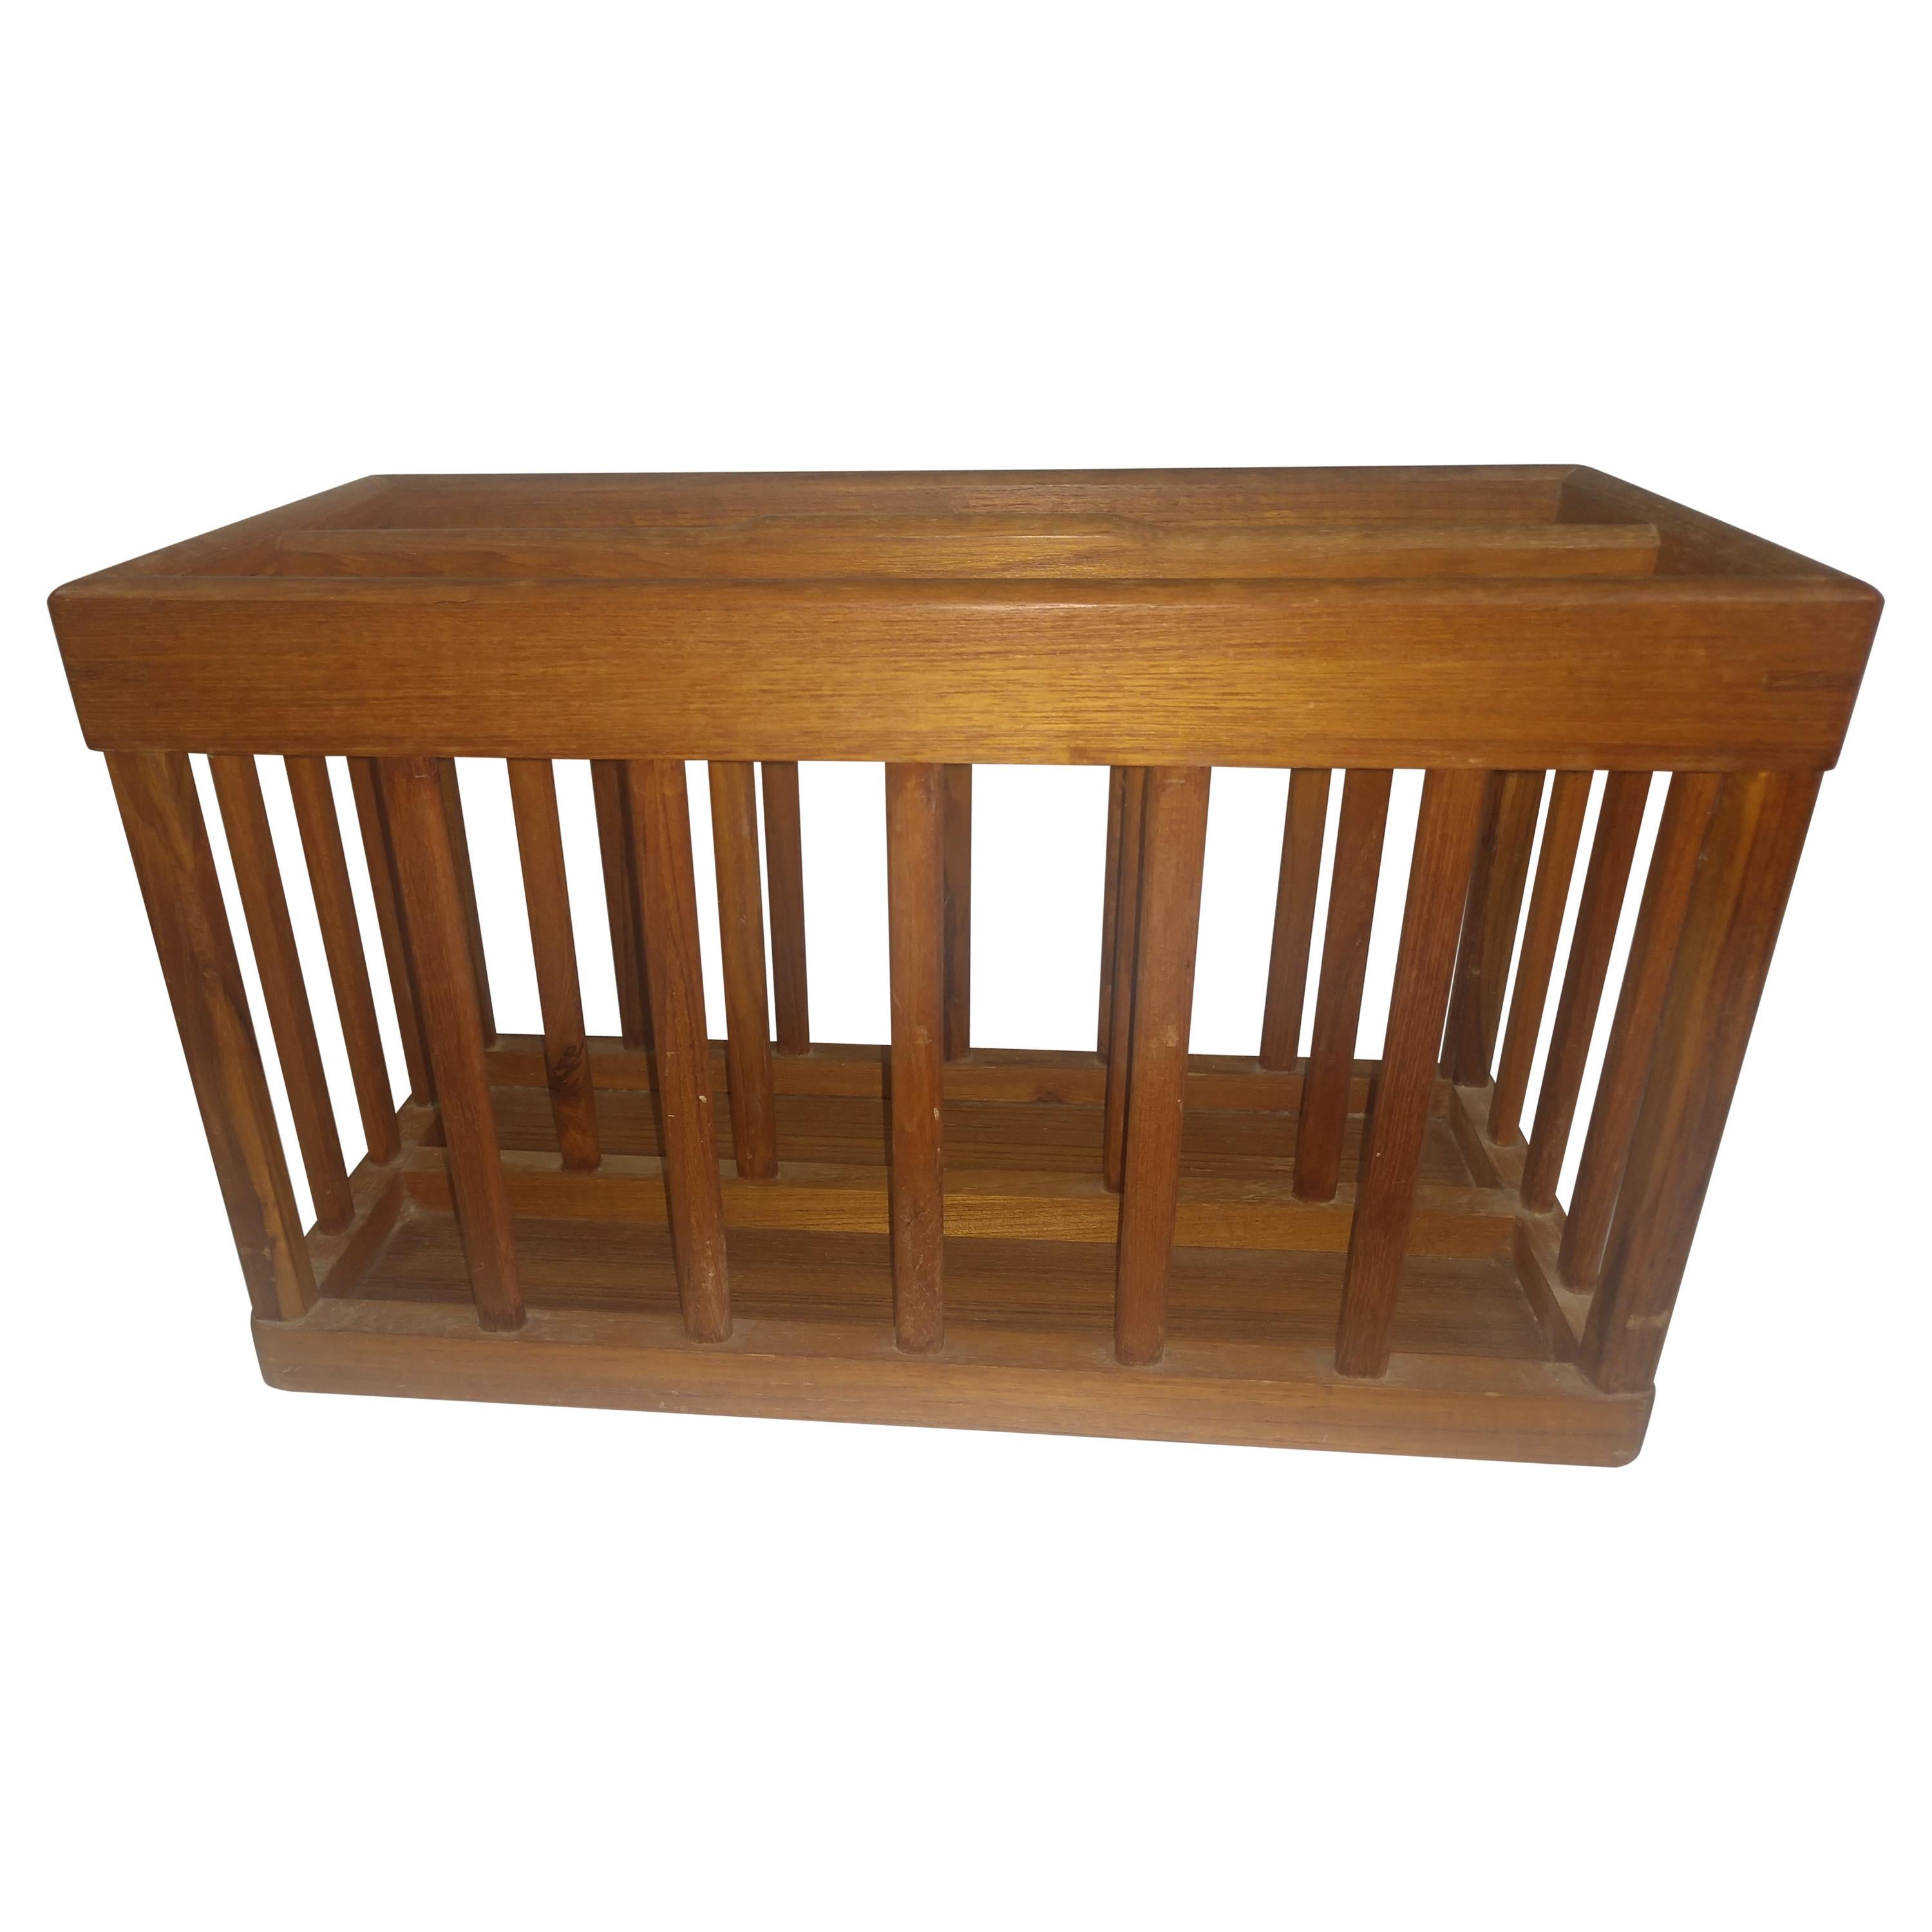 Sculpted flat spindles with splined corners are the details in this Scandinavian beauty. Signed Good Wood on bottom.